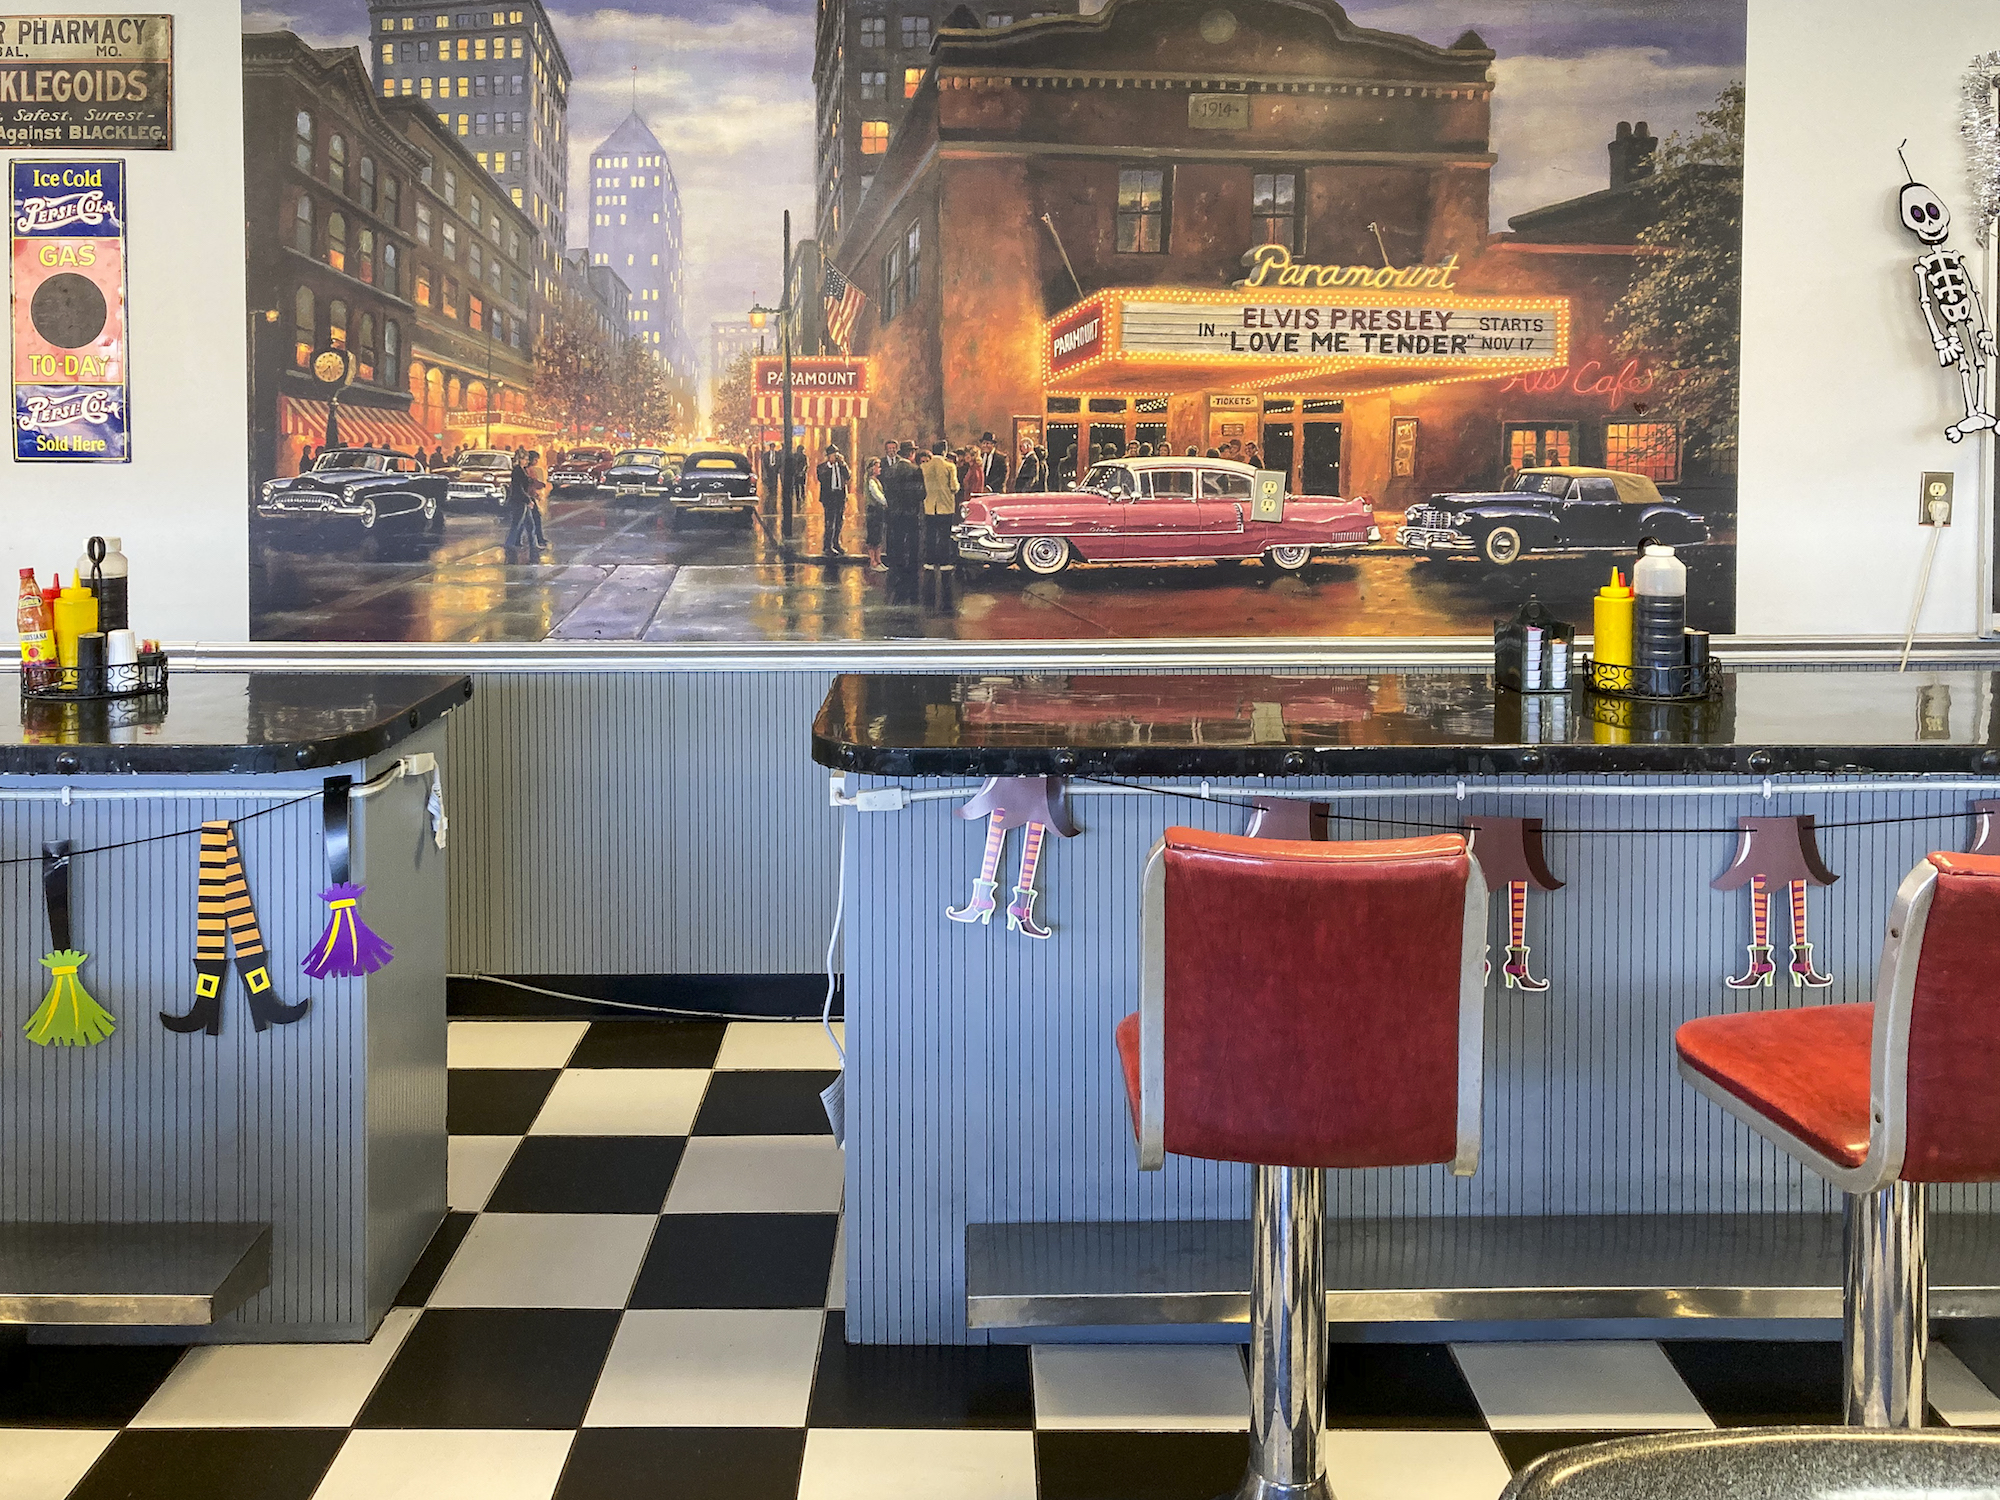 worthy detours dines at becky thatcher's diner